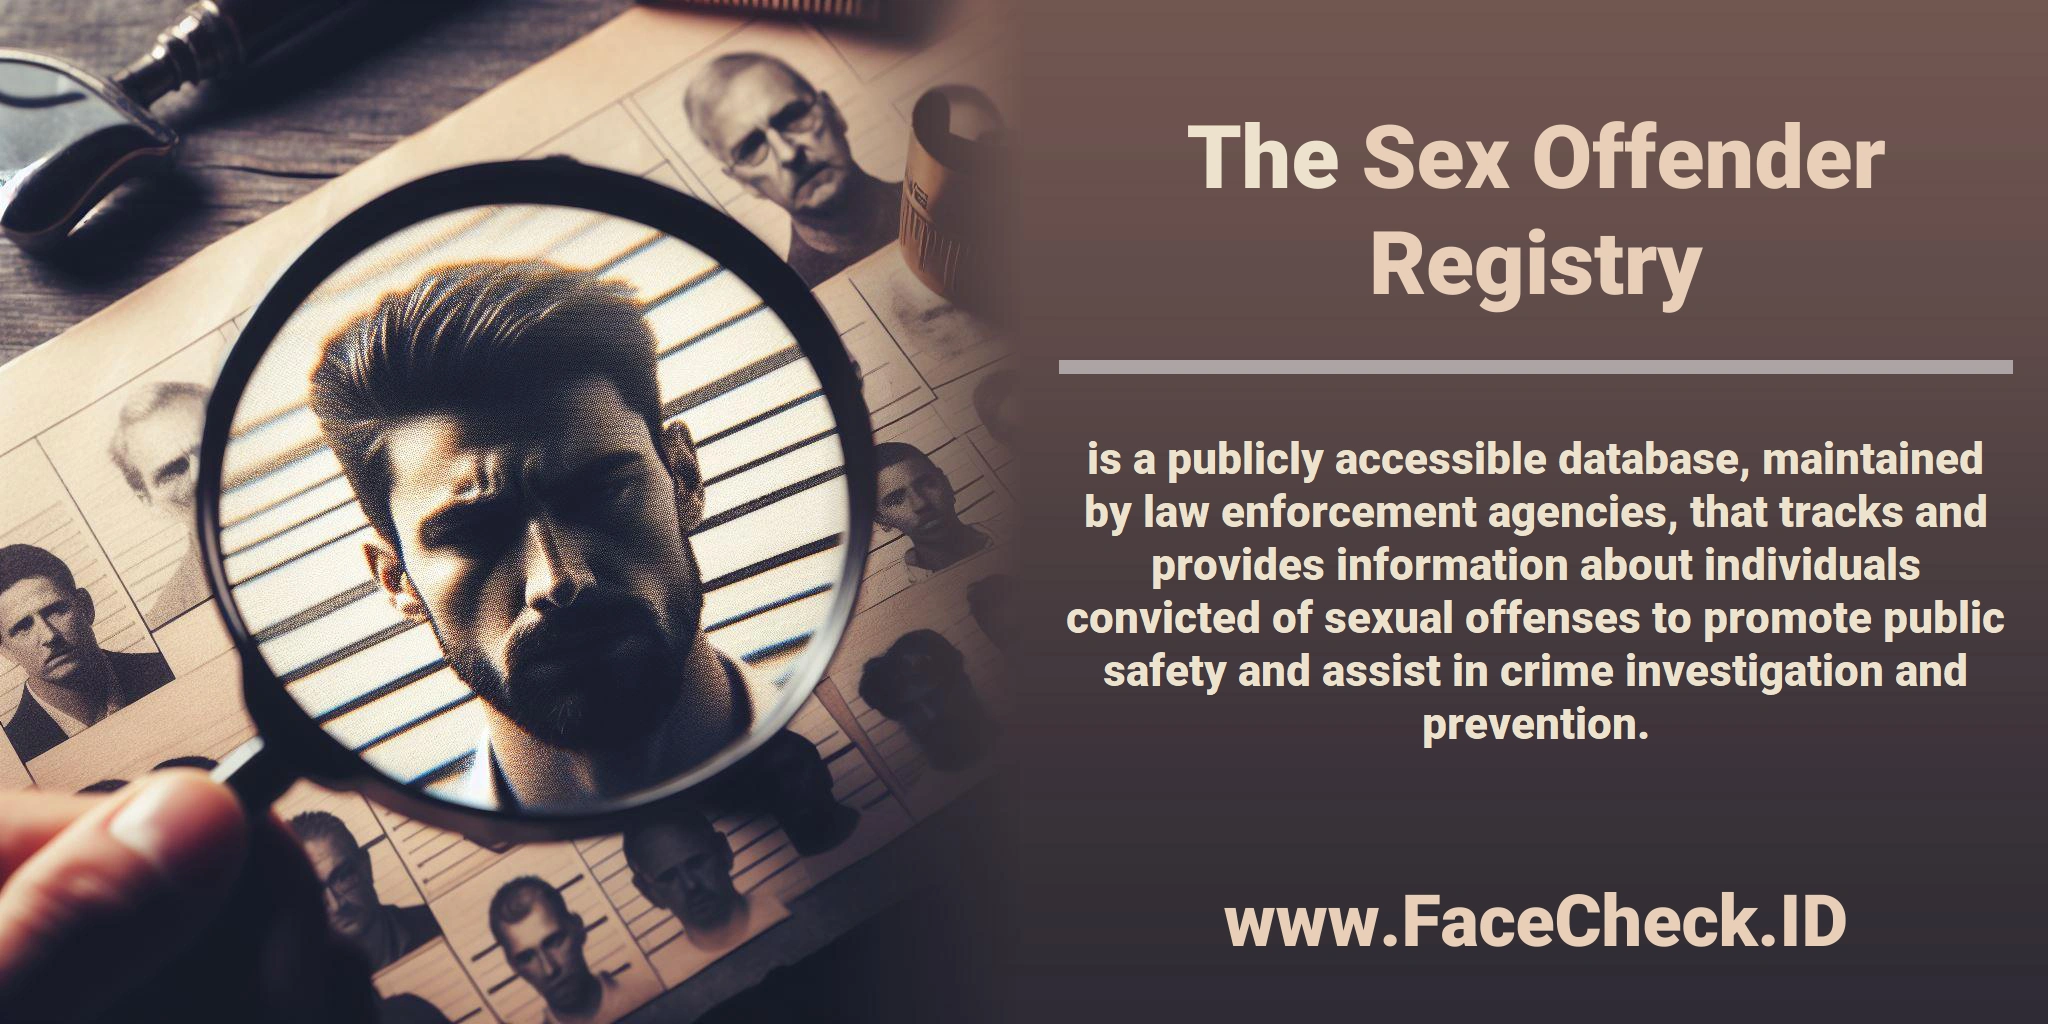 The <b>Sex Offender Registry</b> is a publicly accessible database, maintained by law enforcement agencies, that tracks and provides information about individuals convicted of sexual offenses to promote public safety and assist in crime investigation and prevention.